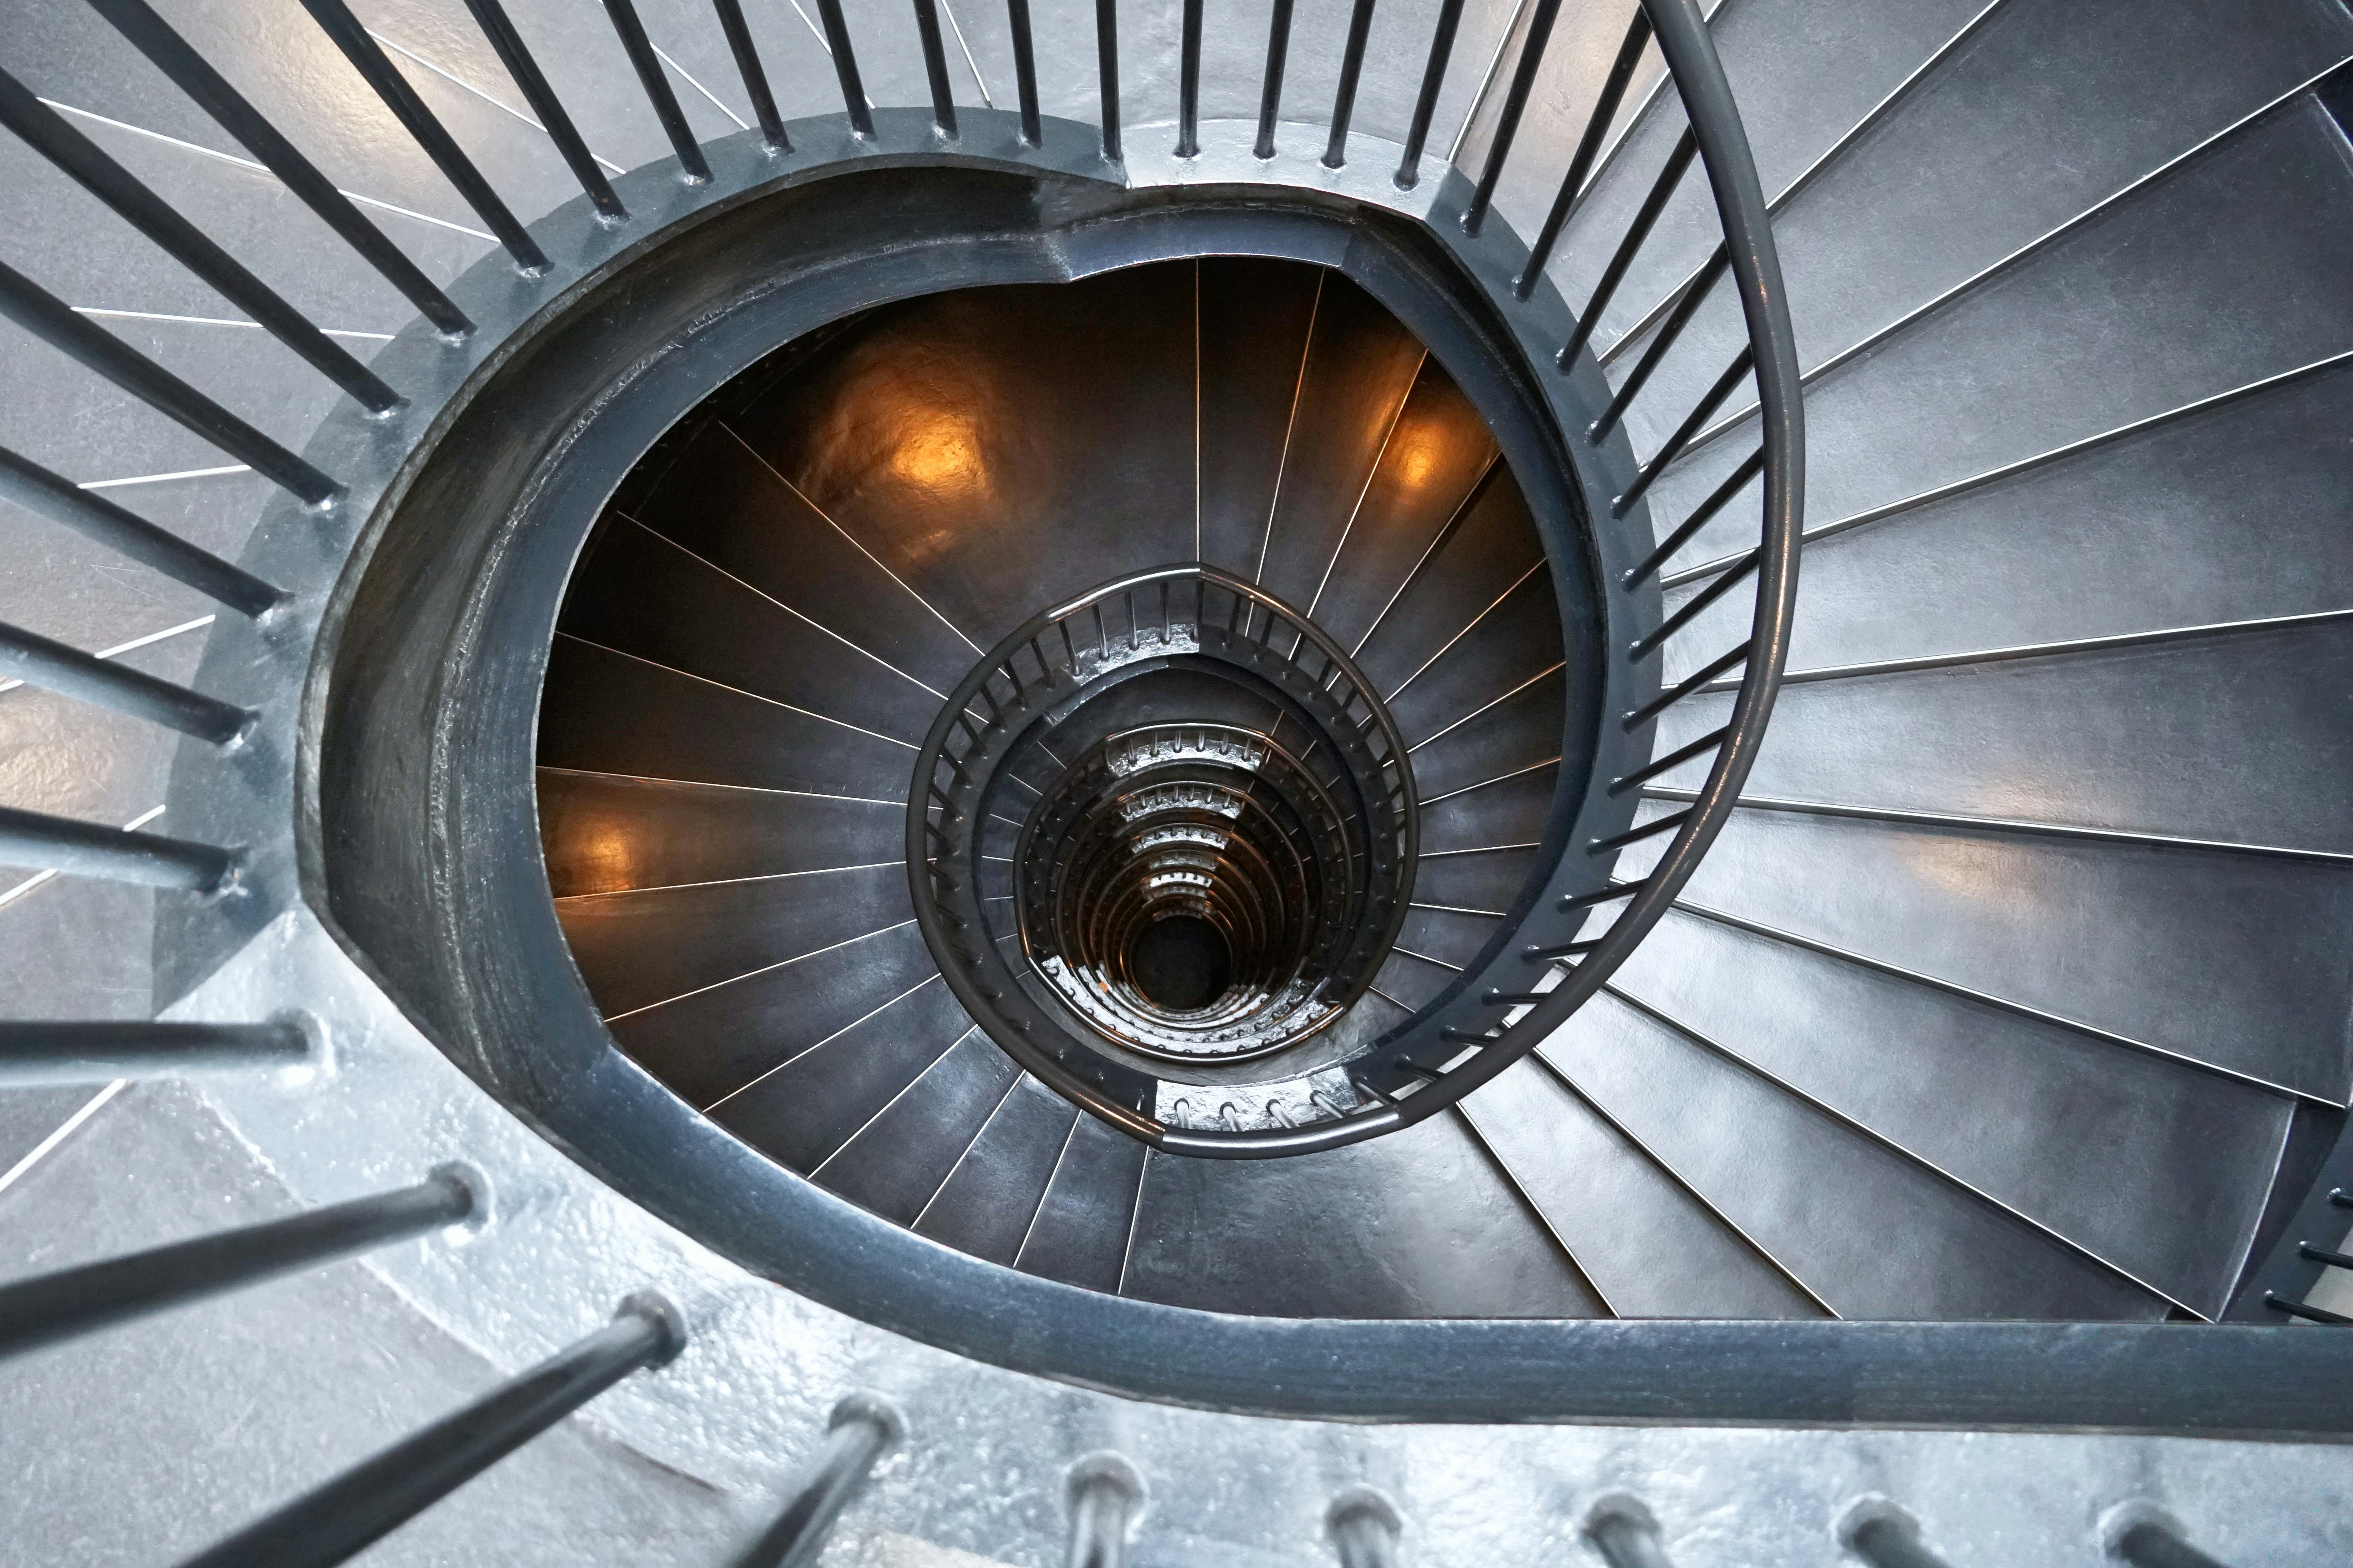 Spiral stairs leading down